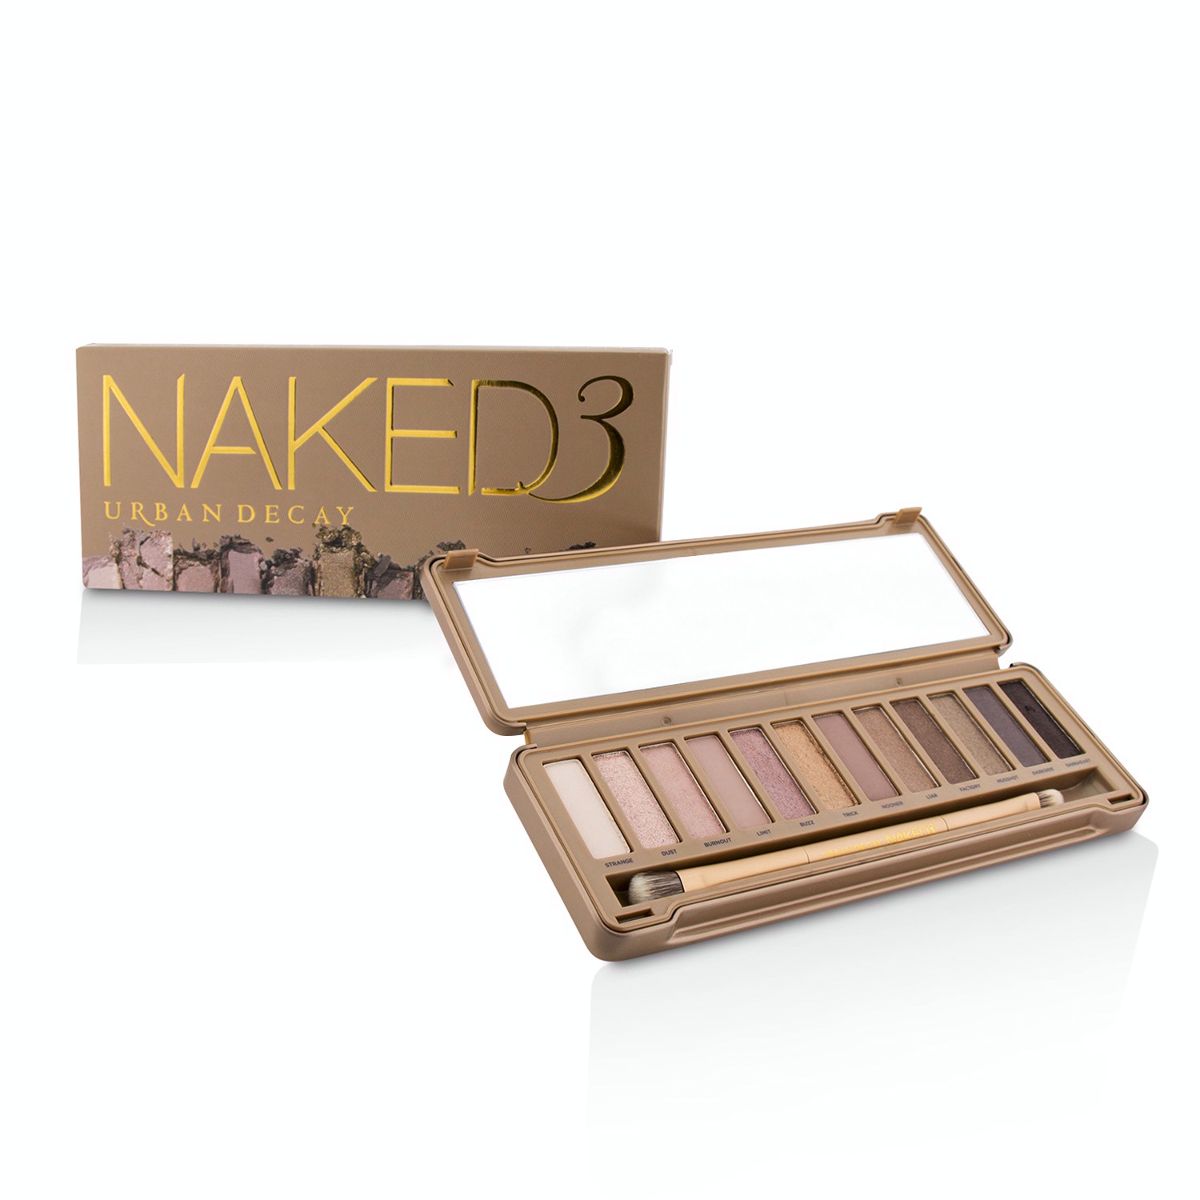 Naked 3 Eyeshadow Palette: 12x Eyeshadow 1x Doubled Ended Shadow/Blending Brush Urban Decay Image